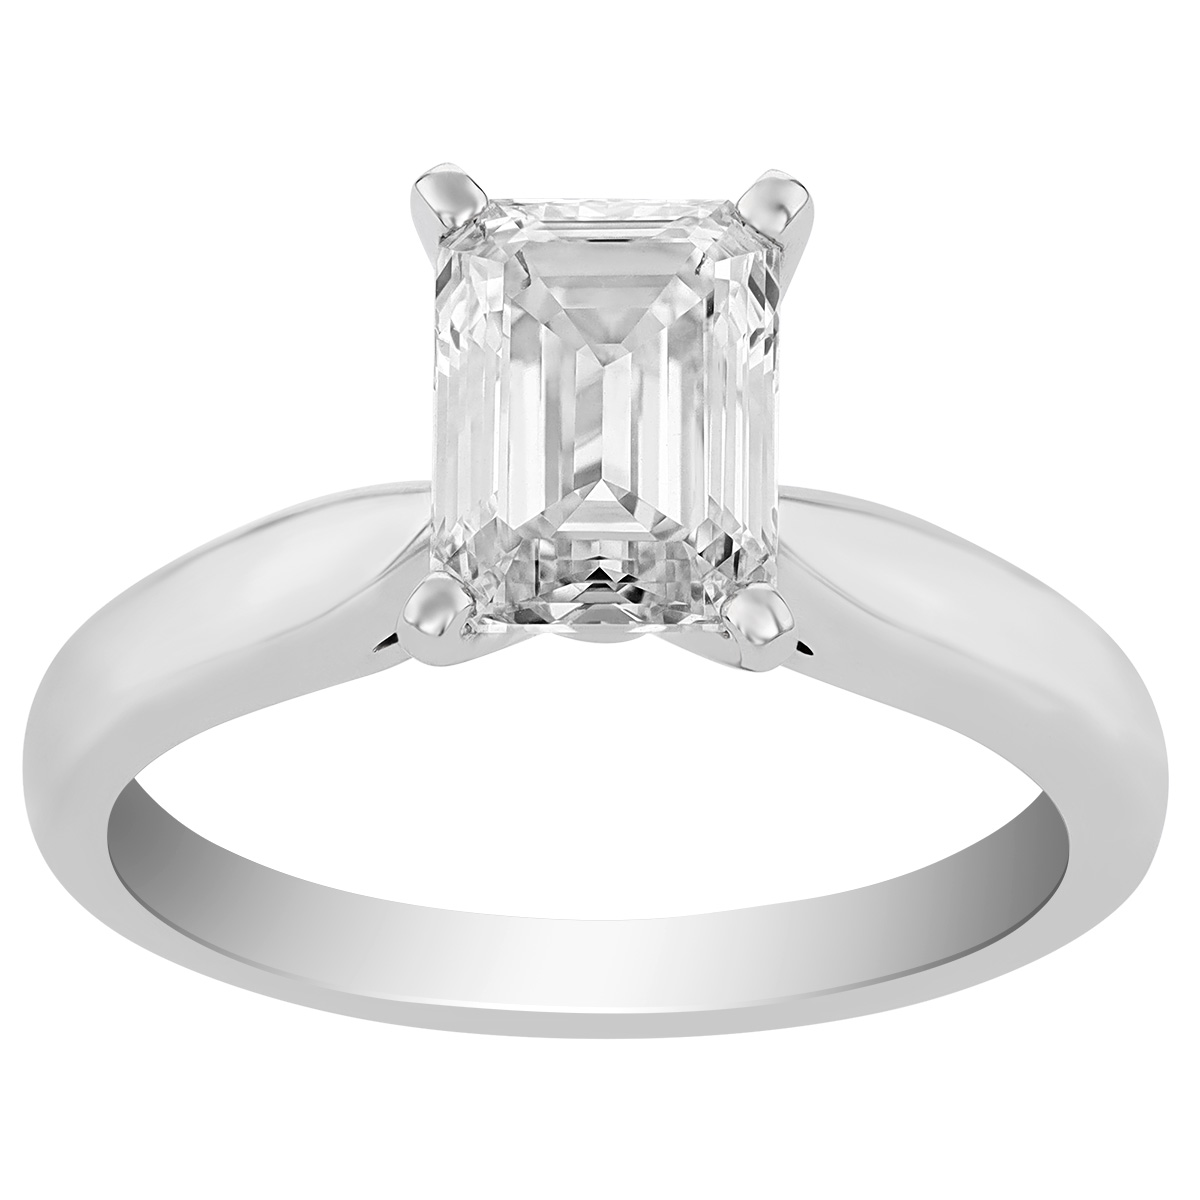 2.10Ct Emerald Cut Diamond In 14K White Gold Solitaire Engagement Ring 